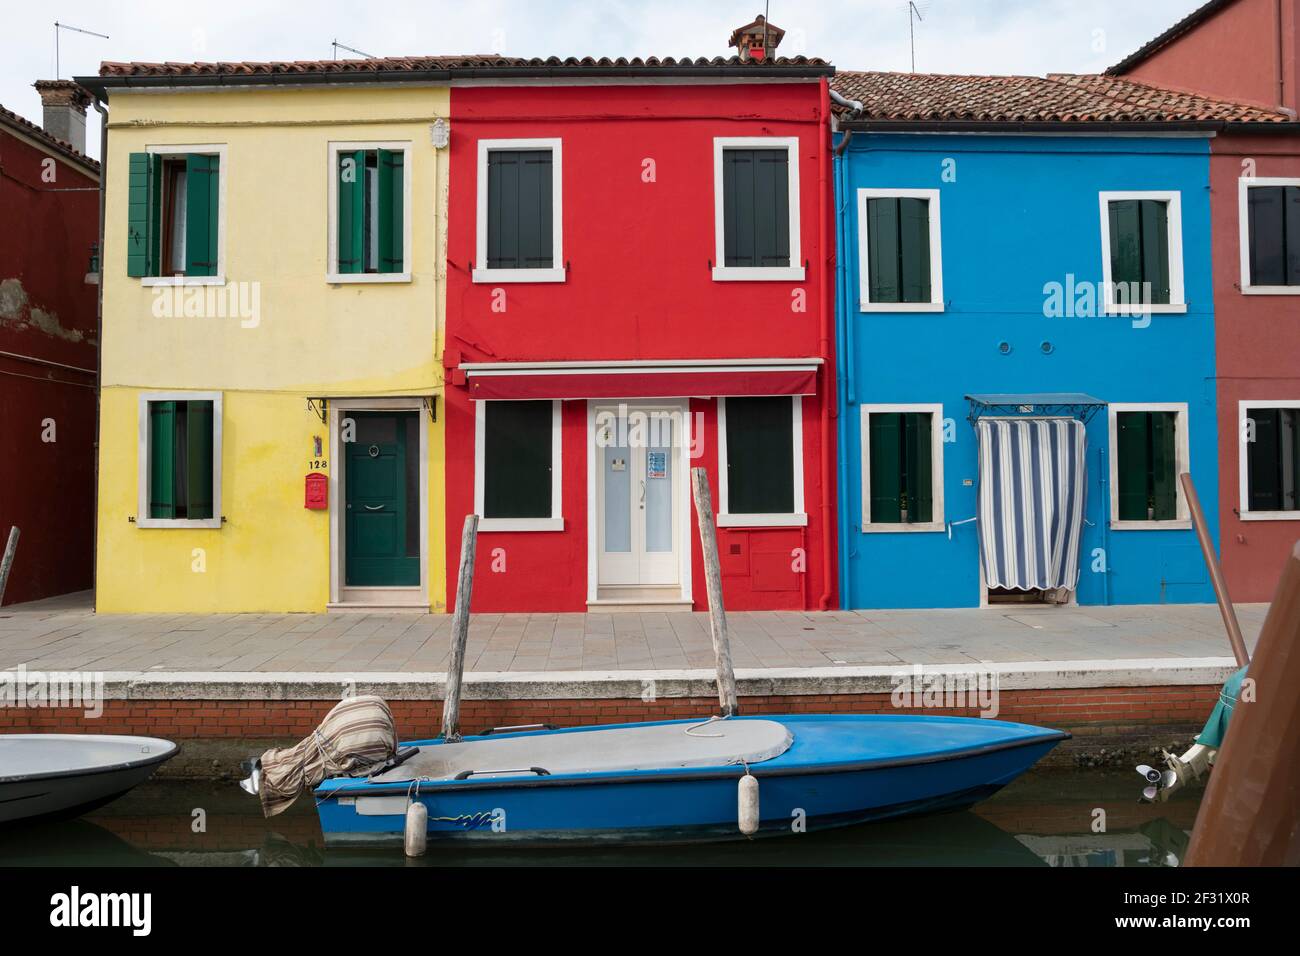 Burano island, characteristic view of colorful houses, Venice lagoon, Italy, Europe Stock Photo